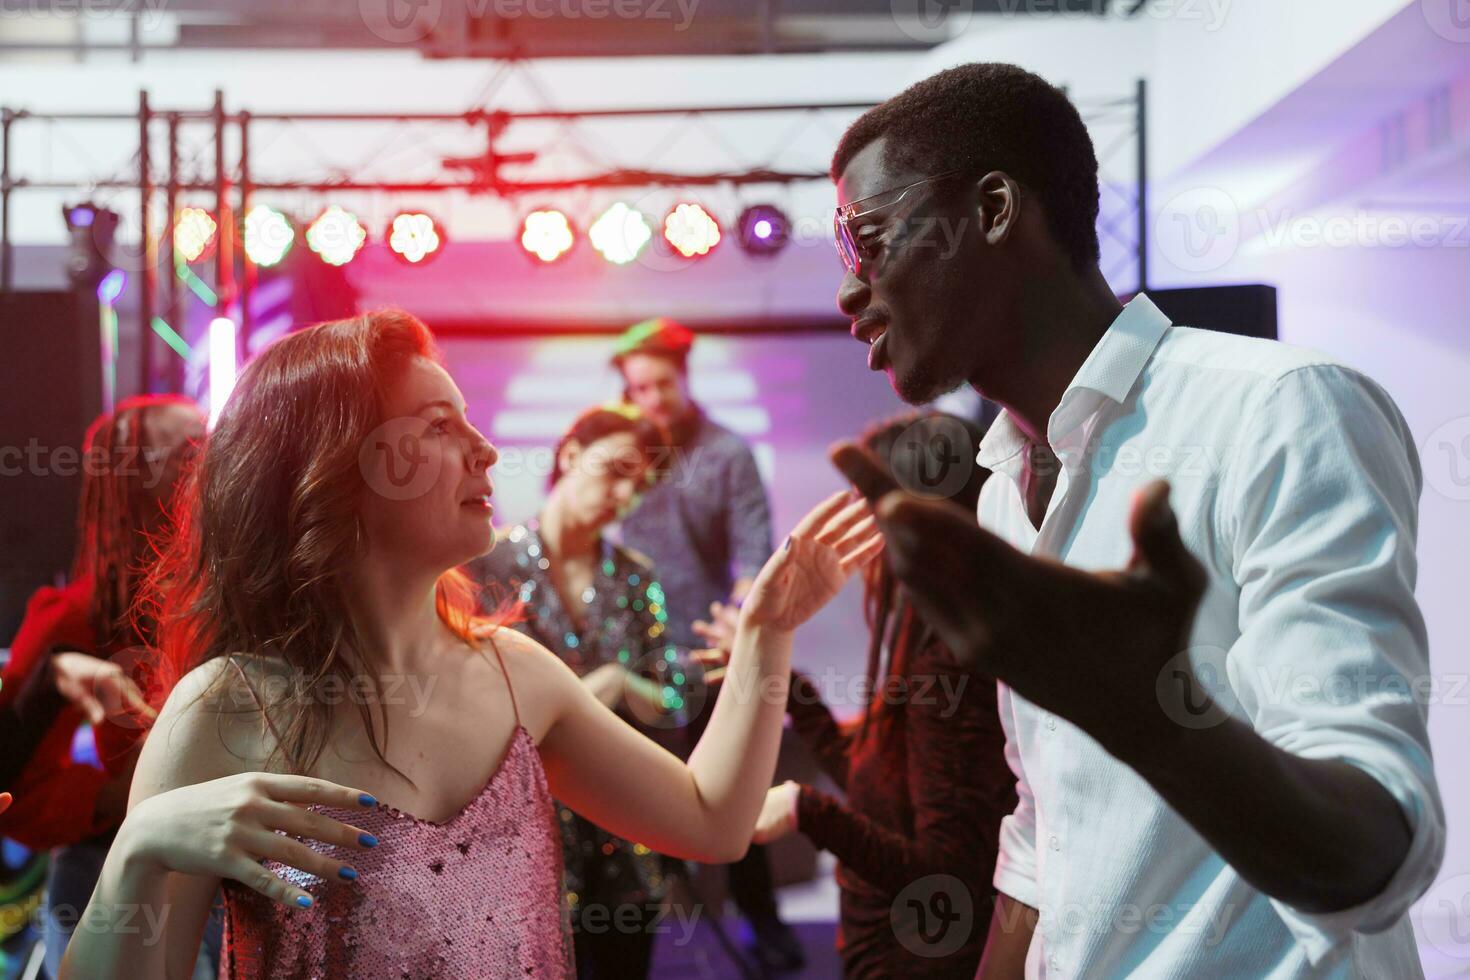 Man and woman diverse friends dancing together and chatting at nightclub disco party. Young multiracial couple clubbing and having fun on dancefloor at discotheque in club photo